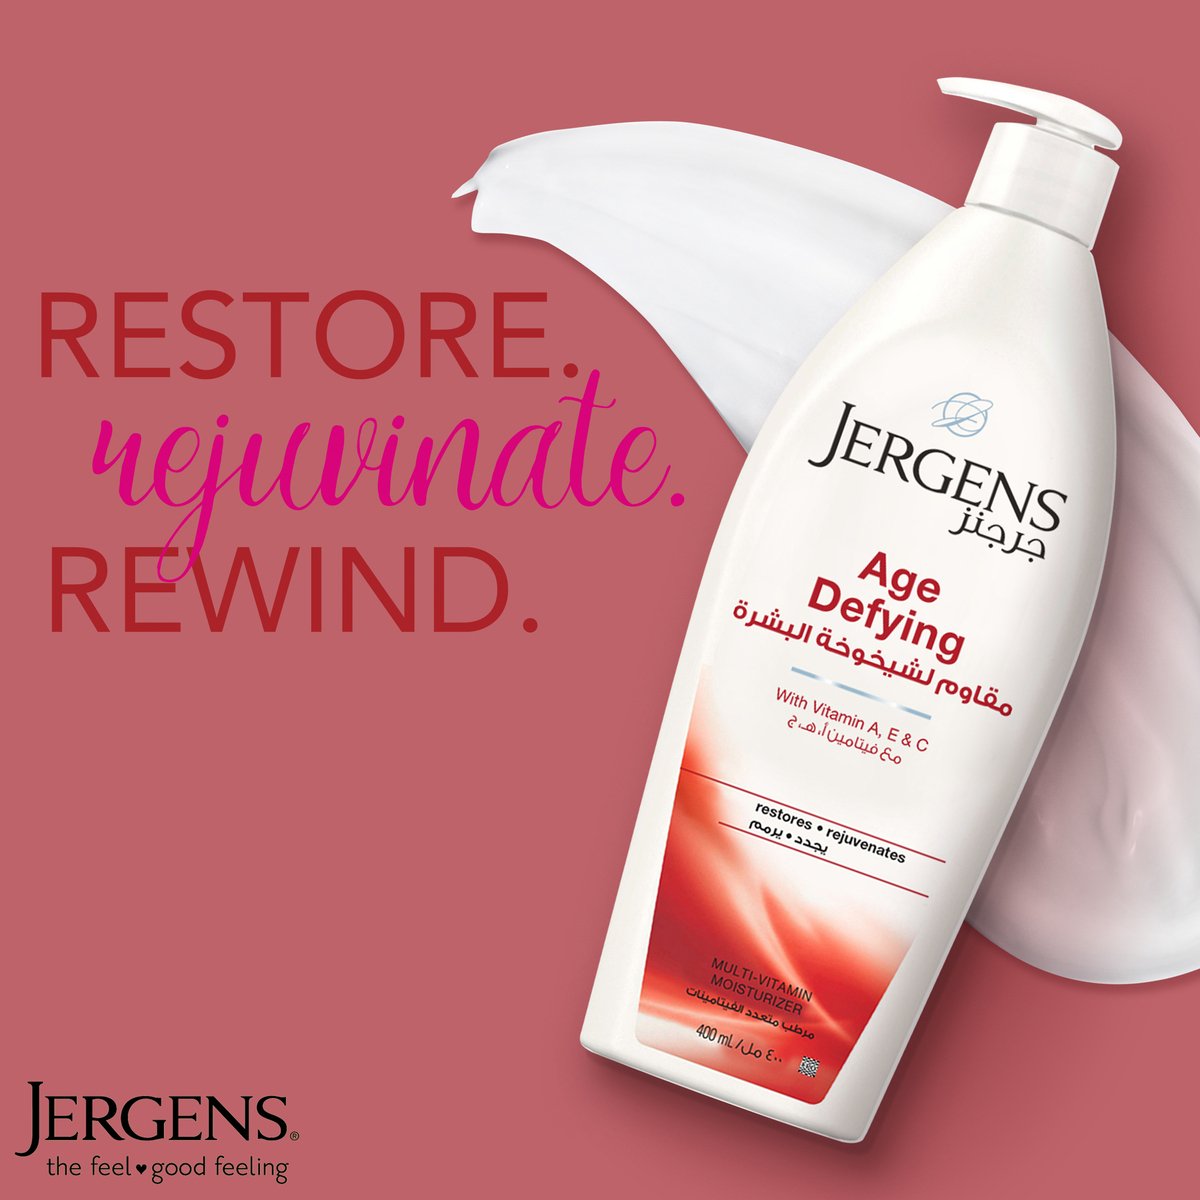 Jergens Body Lotion Age Defying 600 ml